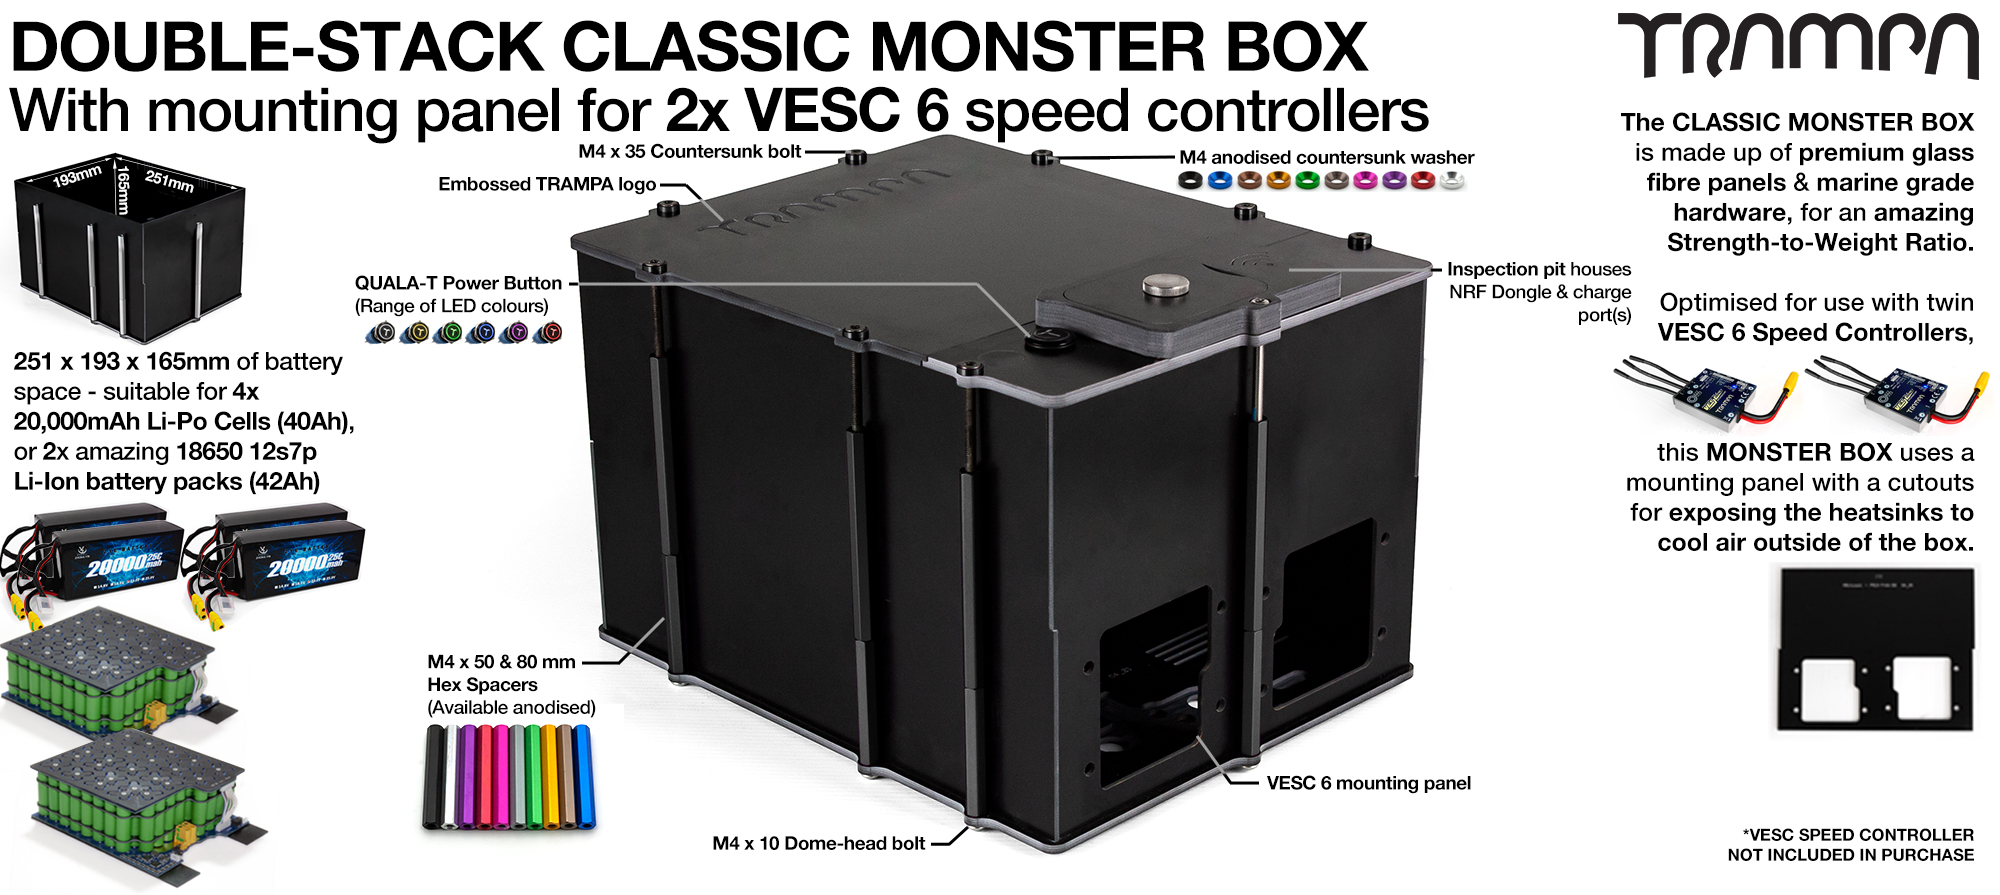 Classic MONSTER Box MkV DOUBLE STACKER fits 168x 18650 cells to give 42Ah Range or 4x 22000mAh Li-Po cells ti give 44Ah & has Panels to fit 2x VESC 6 Internally. Works in conjunction with TRAMPA's 2WD Electric Decks